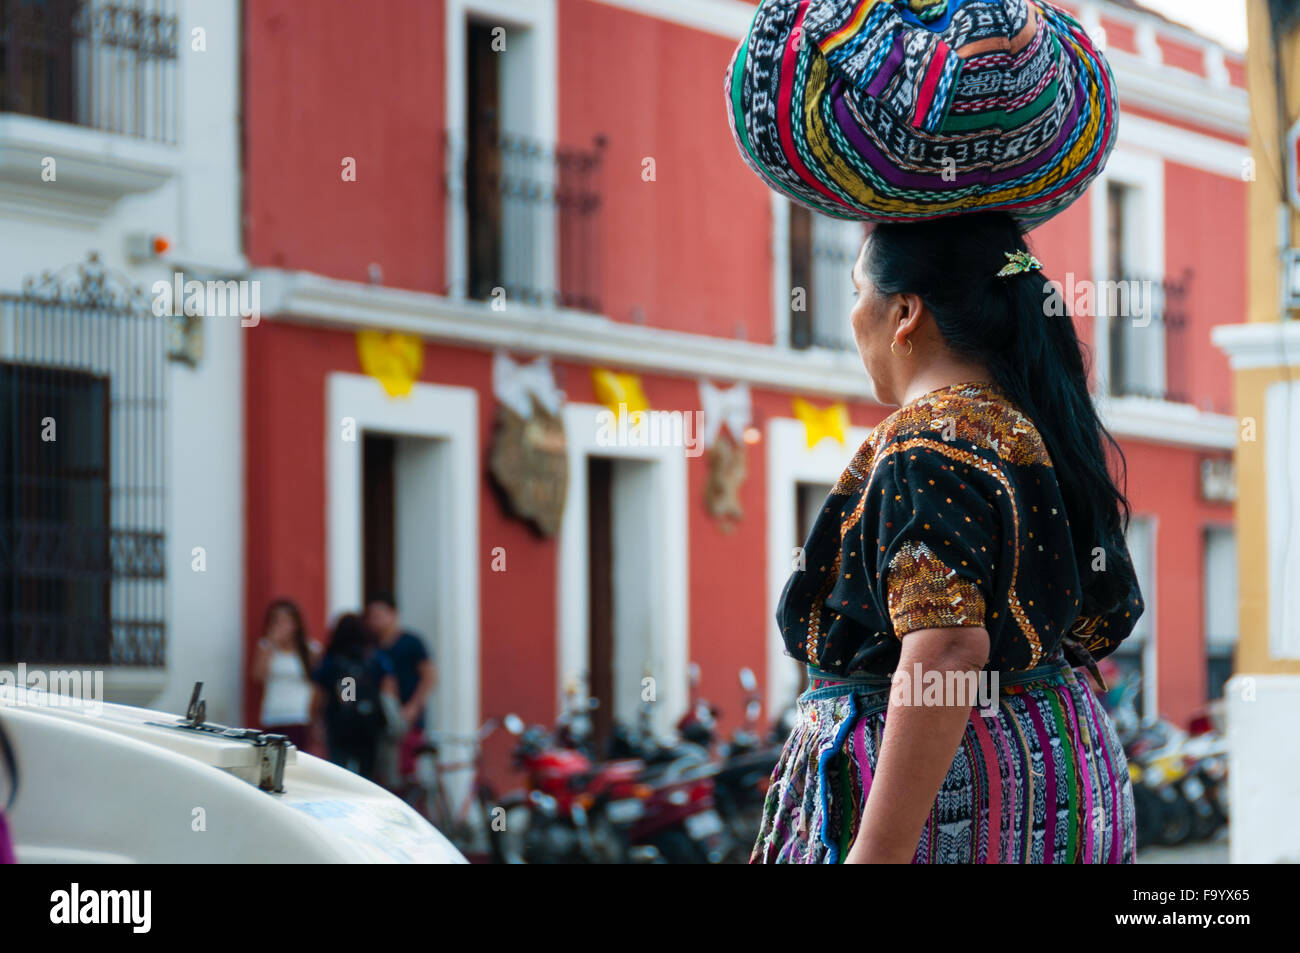 Woman With Tied Cloth bag on Her Head walking the street of Antigua Stock Photo